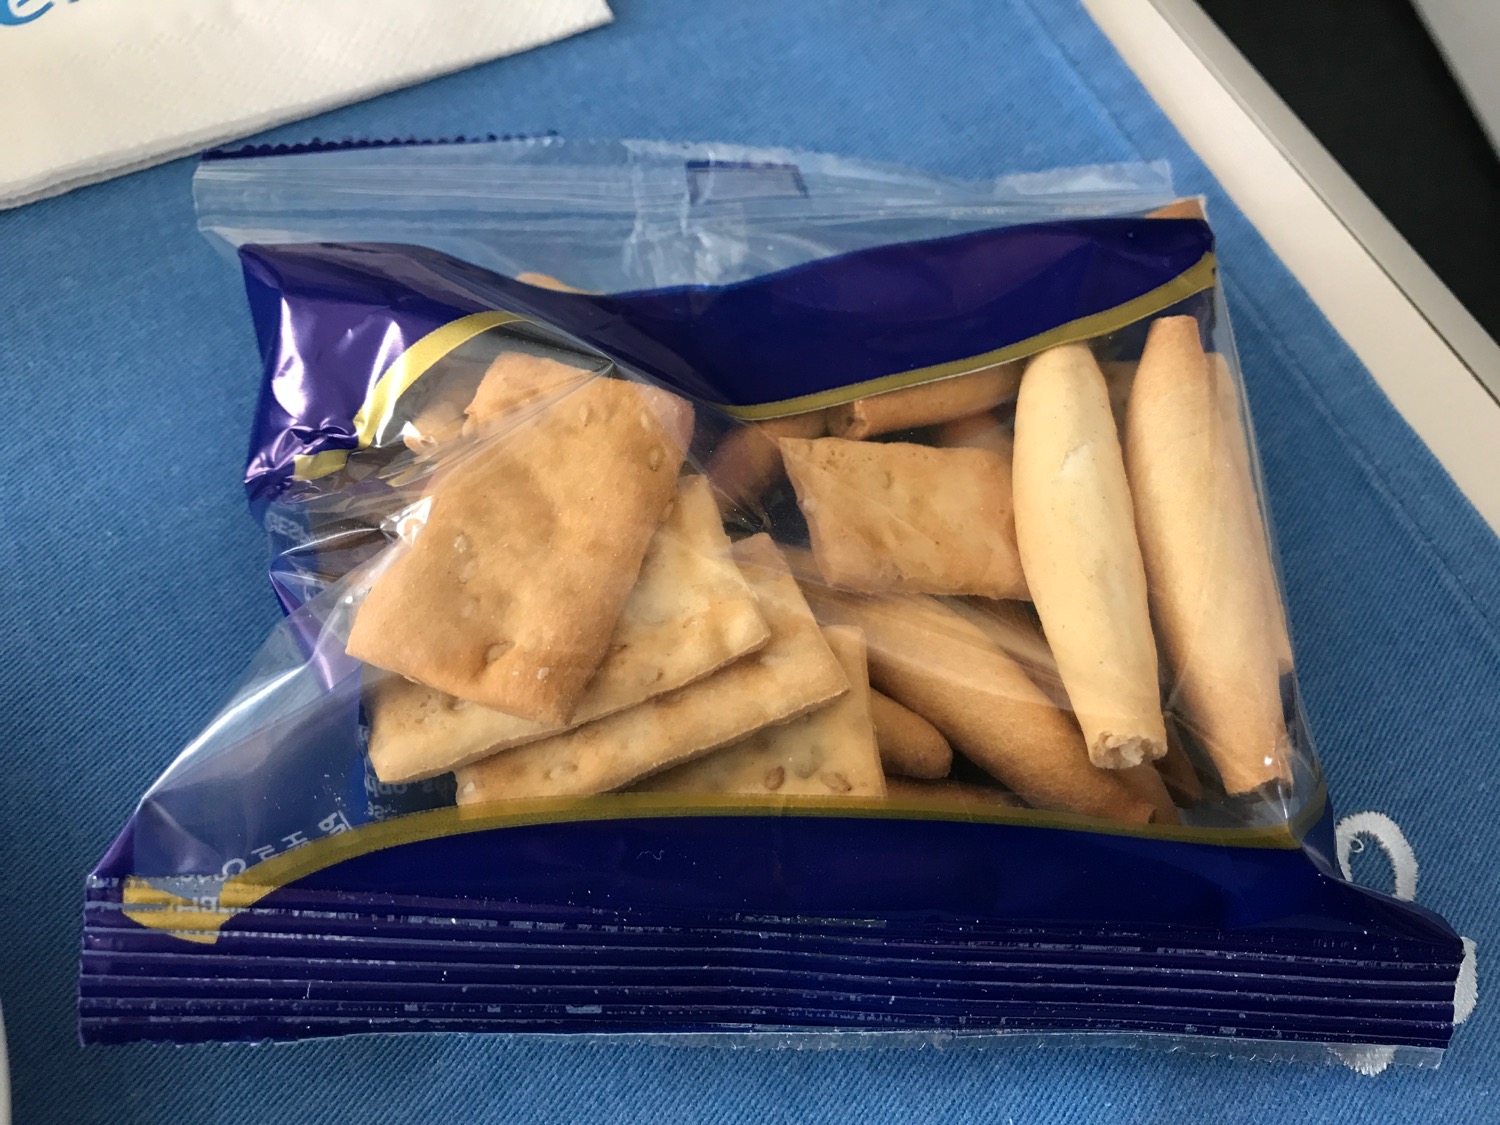 a bag of crackers on a blue surface